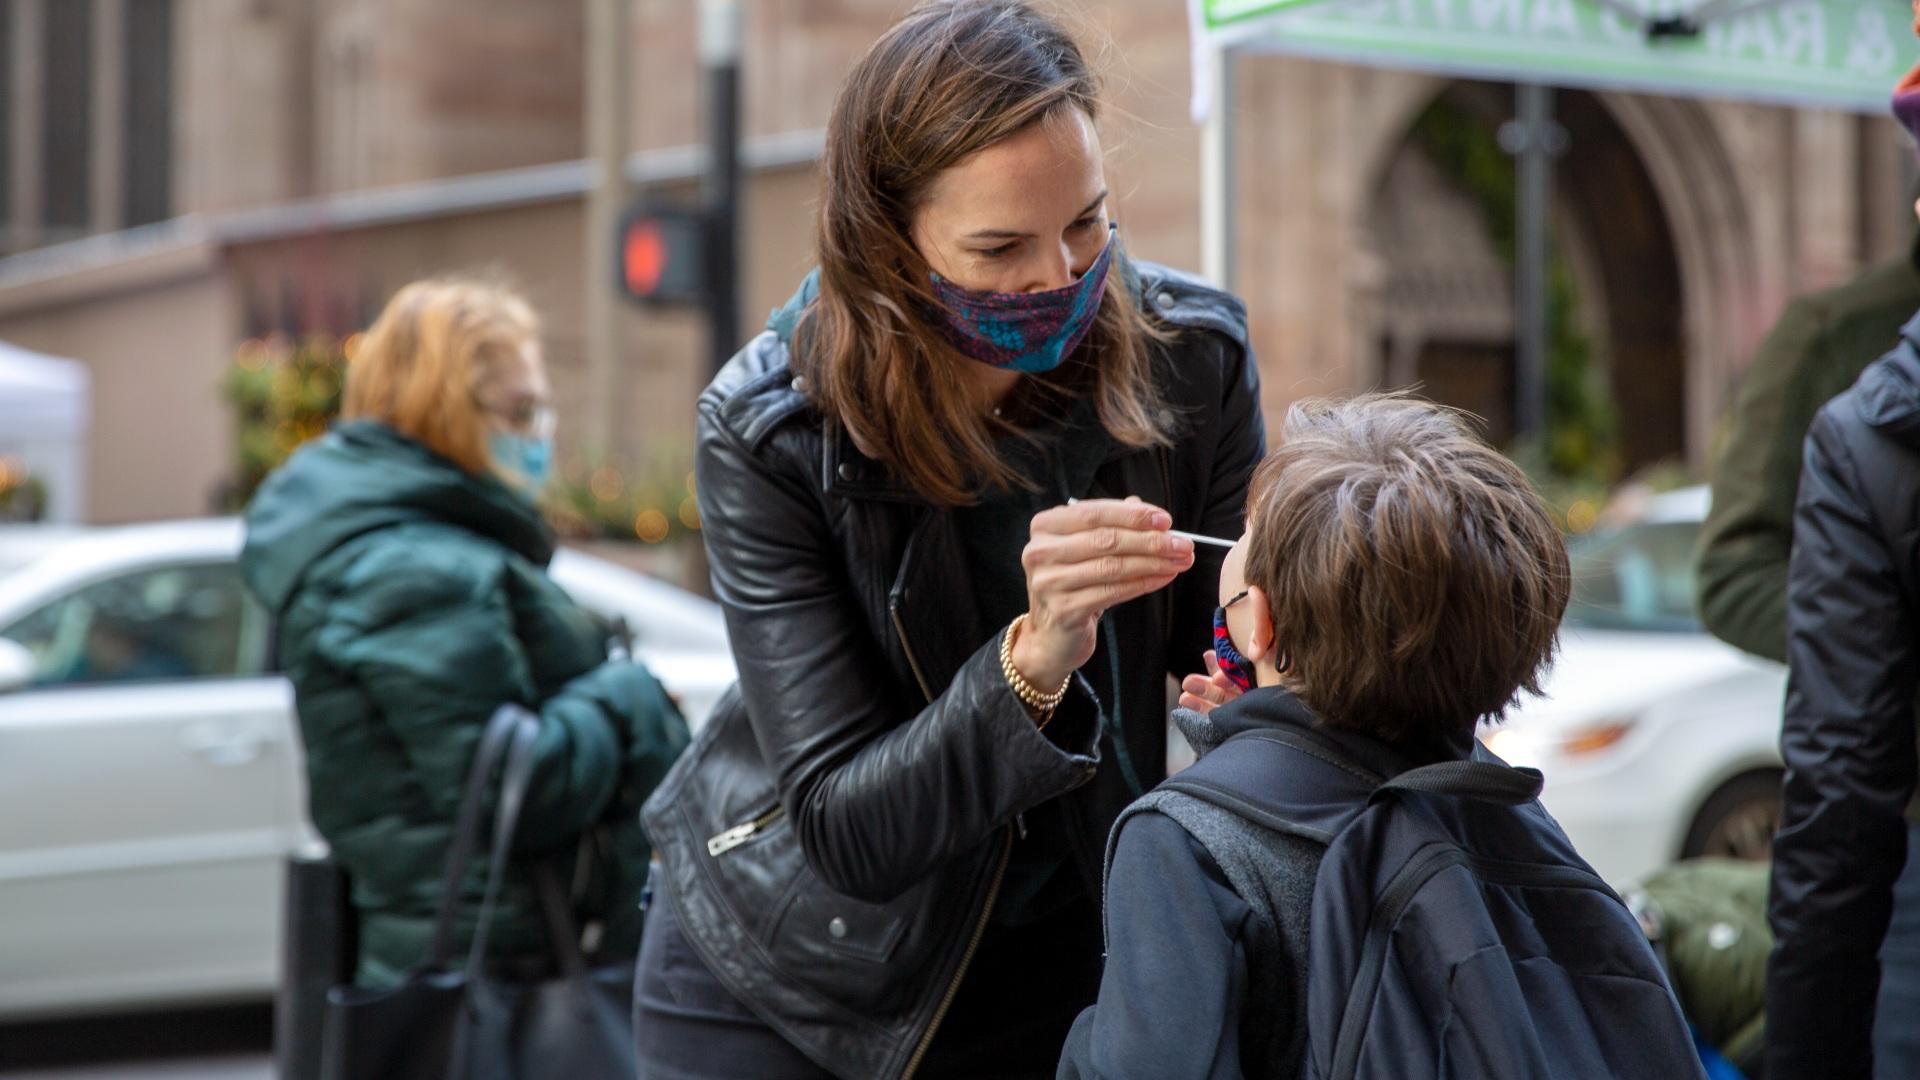 Katie Lucey administers a COVID-19 test on her son Maguire at a PCR and Rapid Antigen COVID-19 coronavirus test pop up on Wall Street in New York on Thursday, Dec. 16, 2021. (AP Photo / Ted Shaffrey)